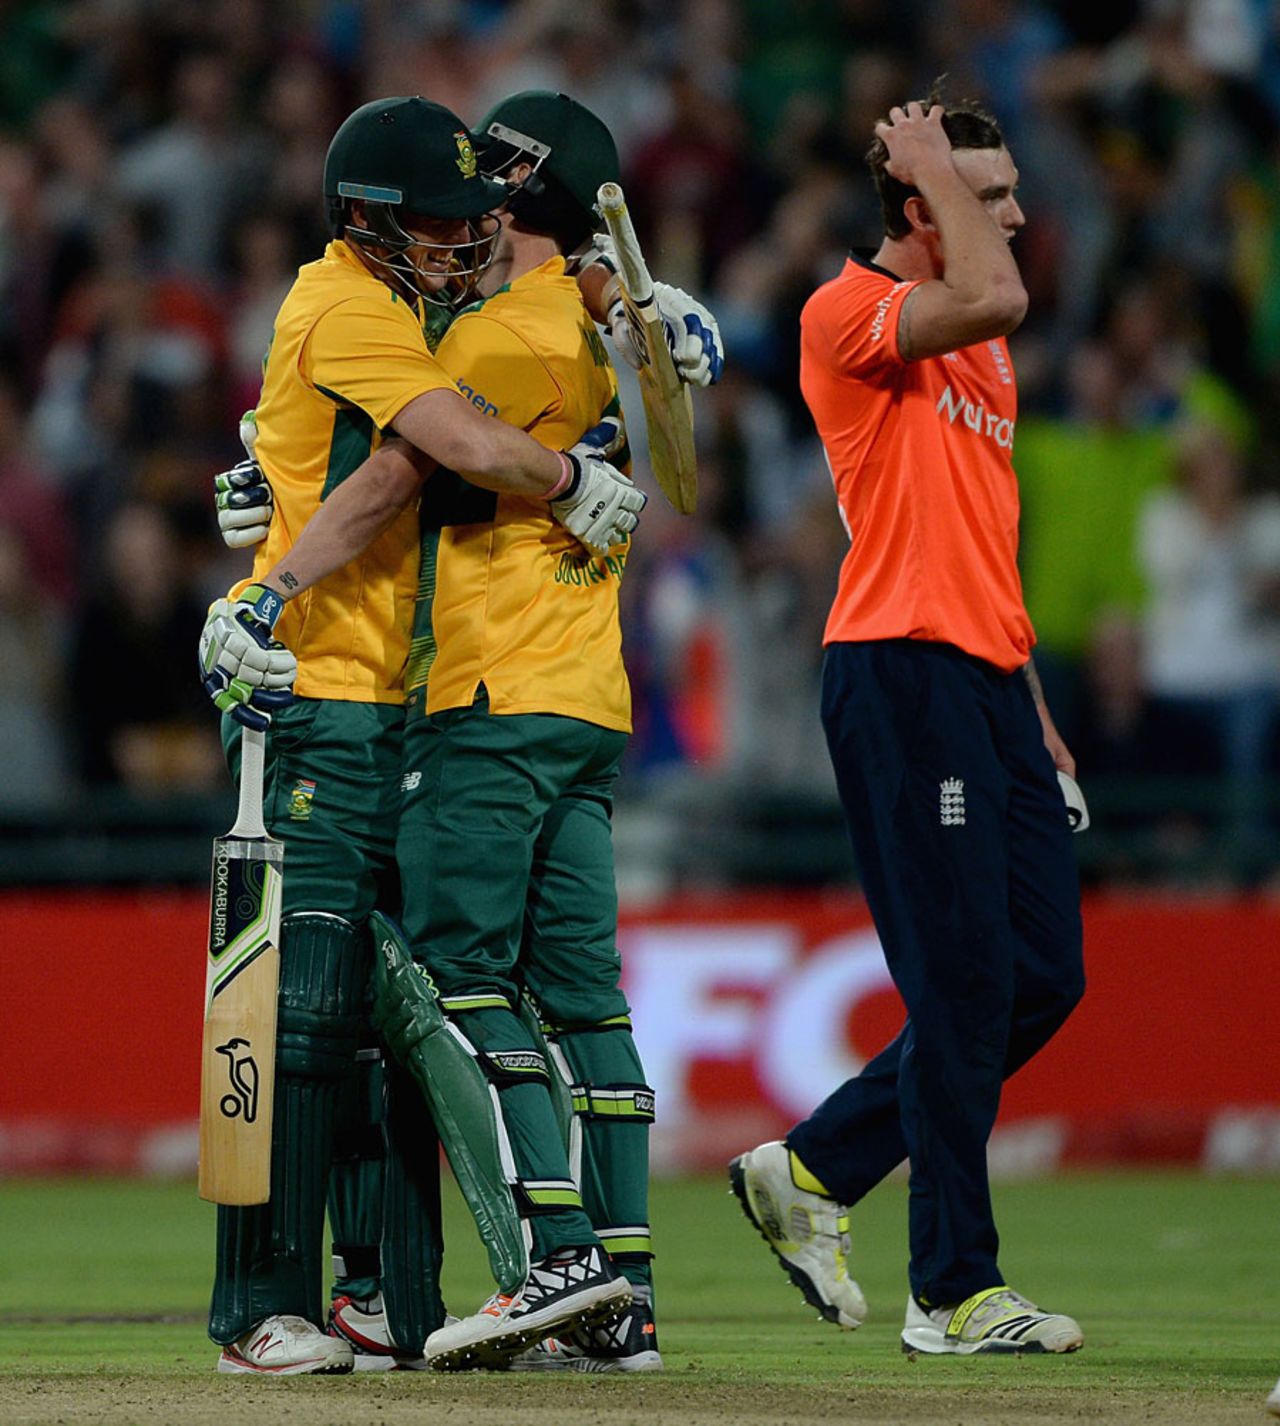 Contrasting emotions: South Africa celebrate while Reece Topley rues his error, South Africa v England, 1st T20, Cape Town, February 19, 2016